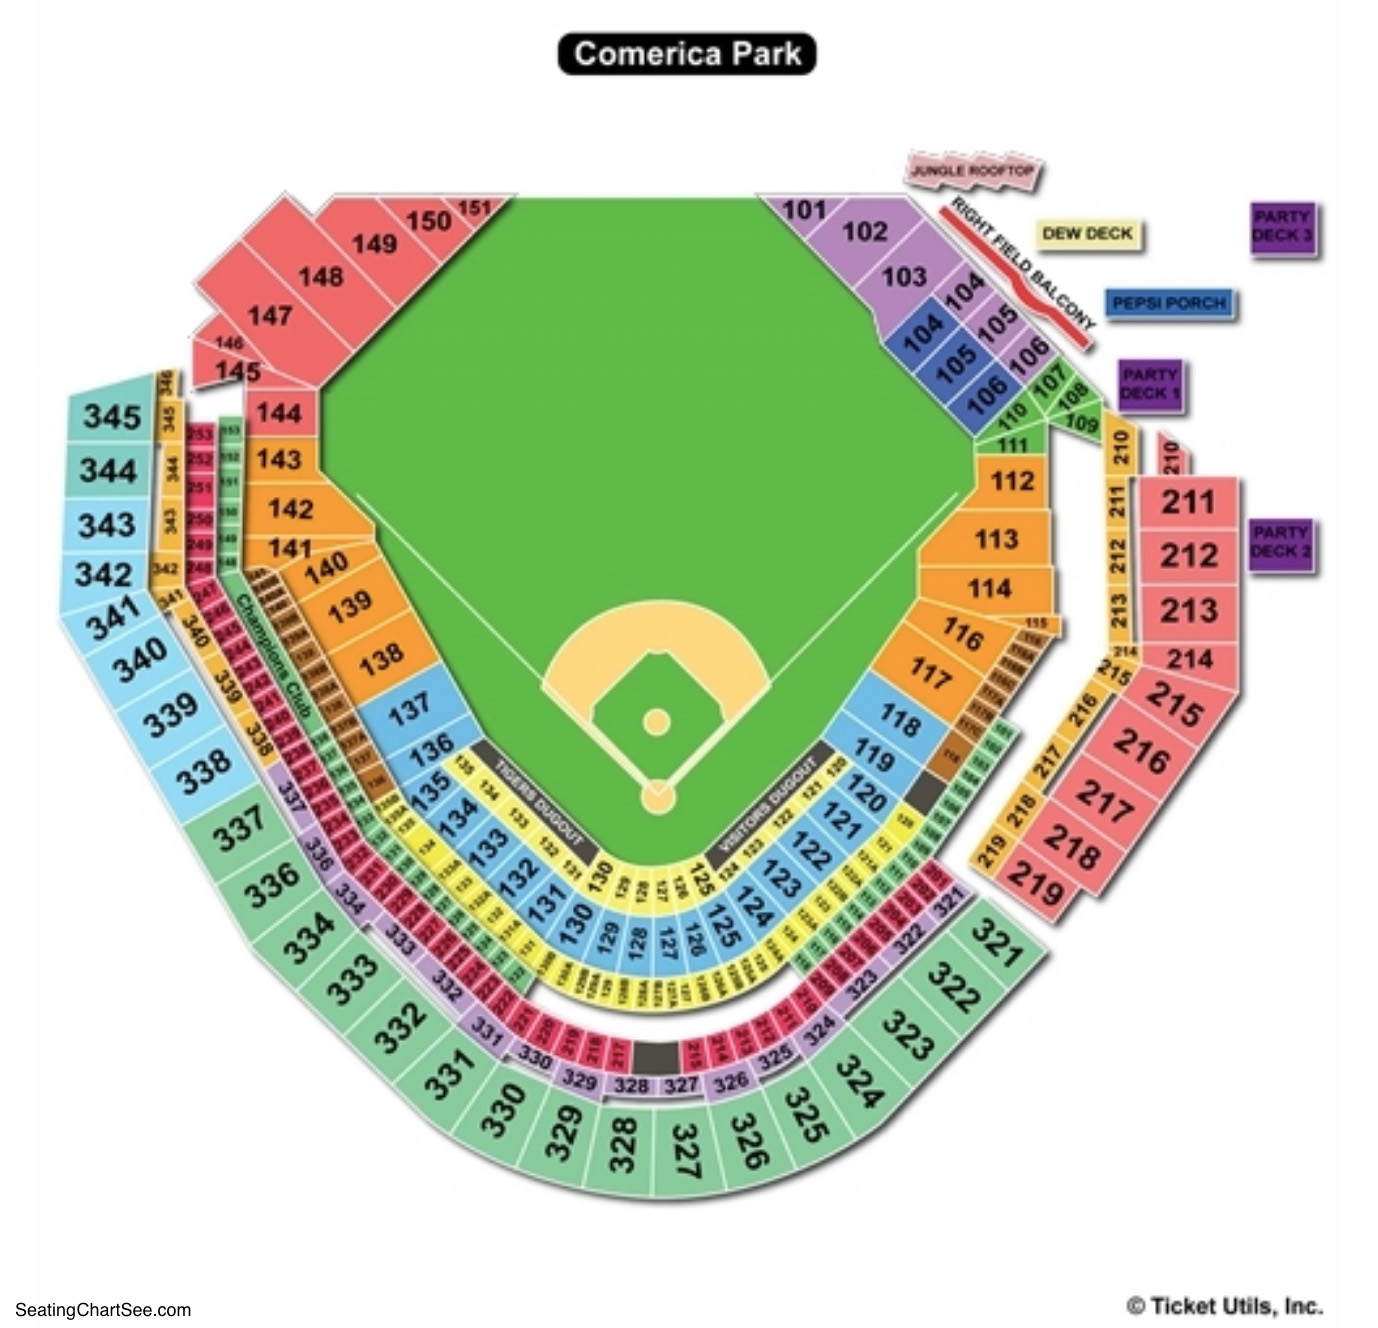 Comerica Park Seating Charts Views